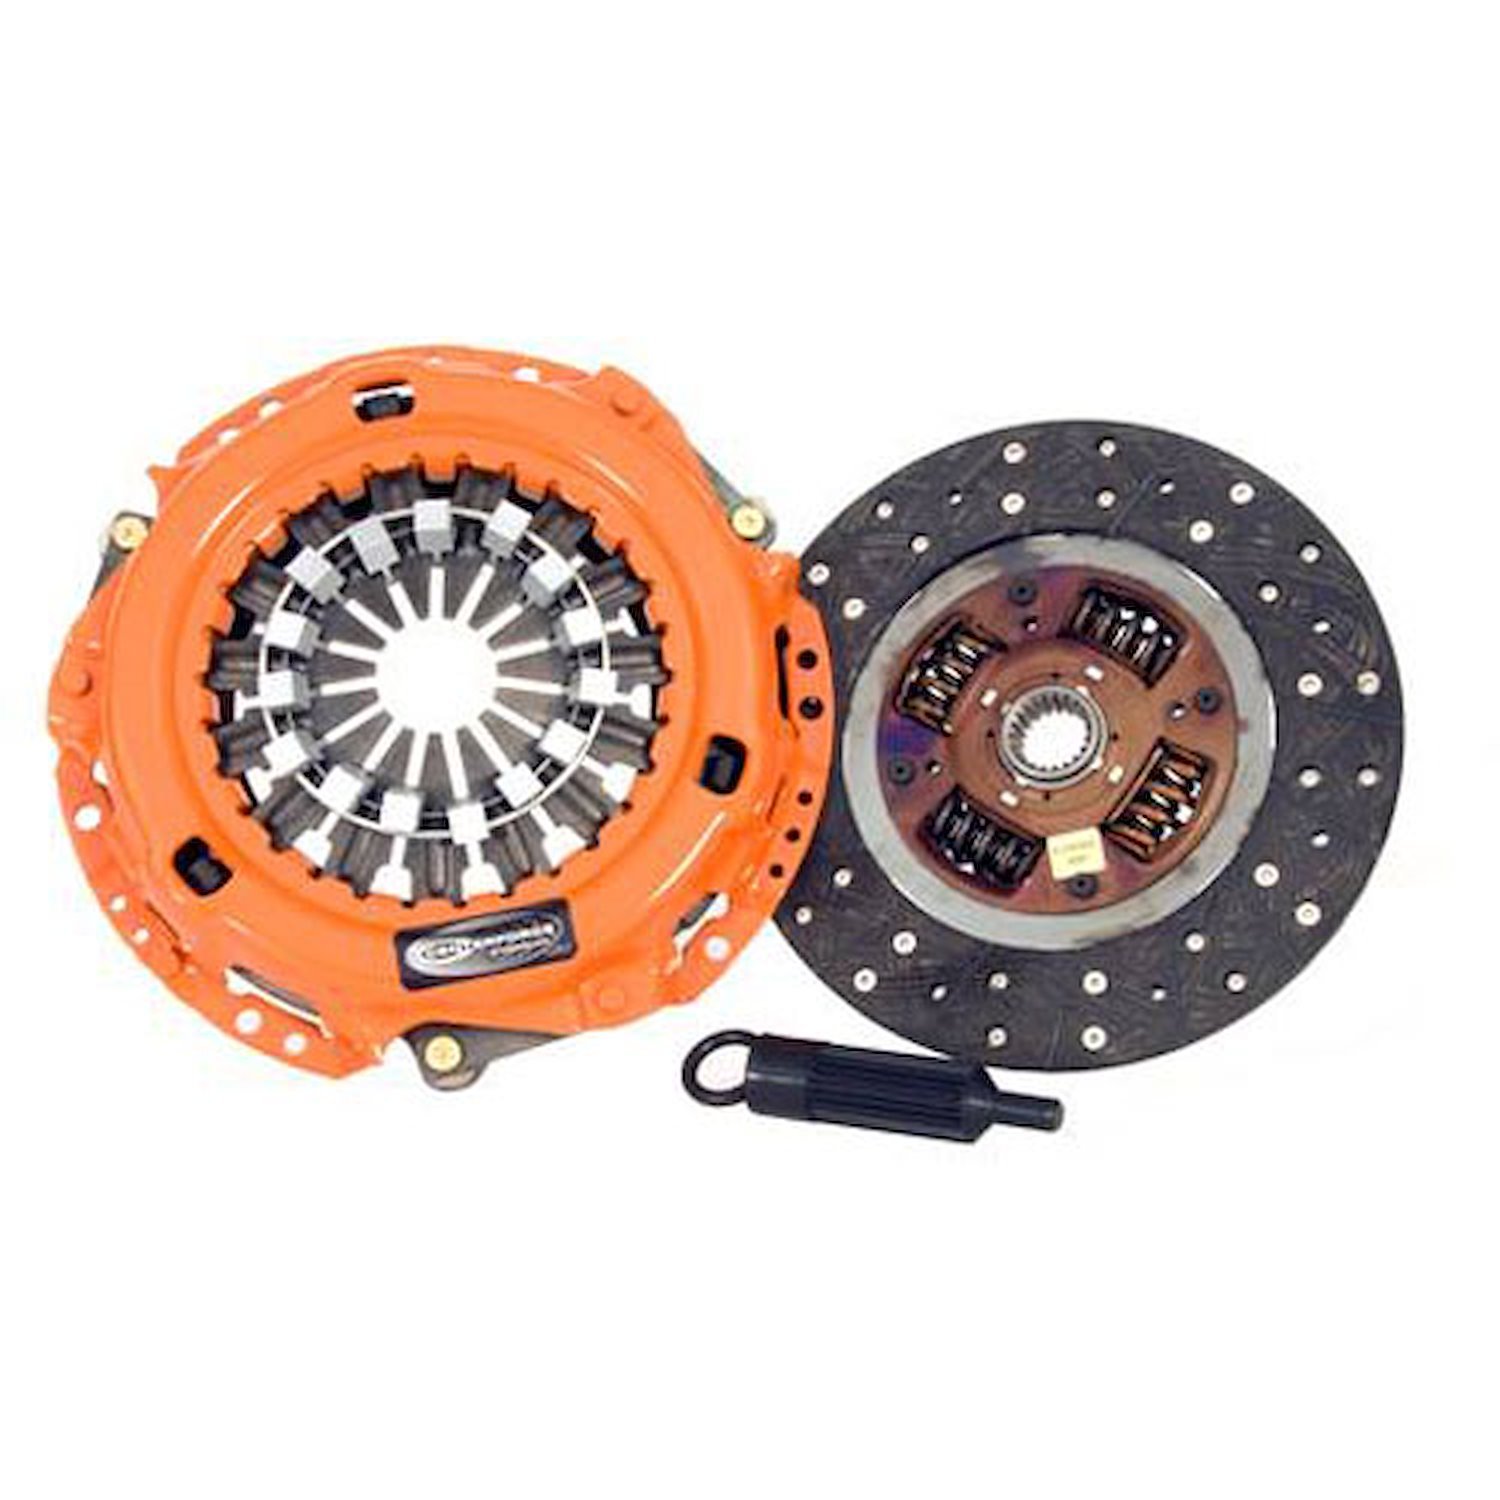 Centerforce II Clutch Kit Includes Pressure Plate, Clutch Disc and Alignment Tool